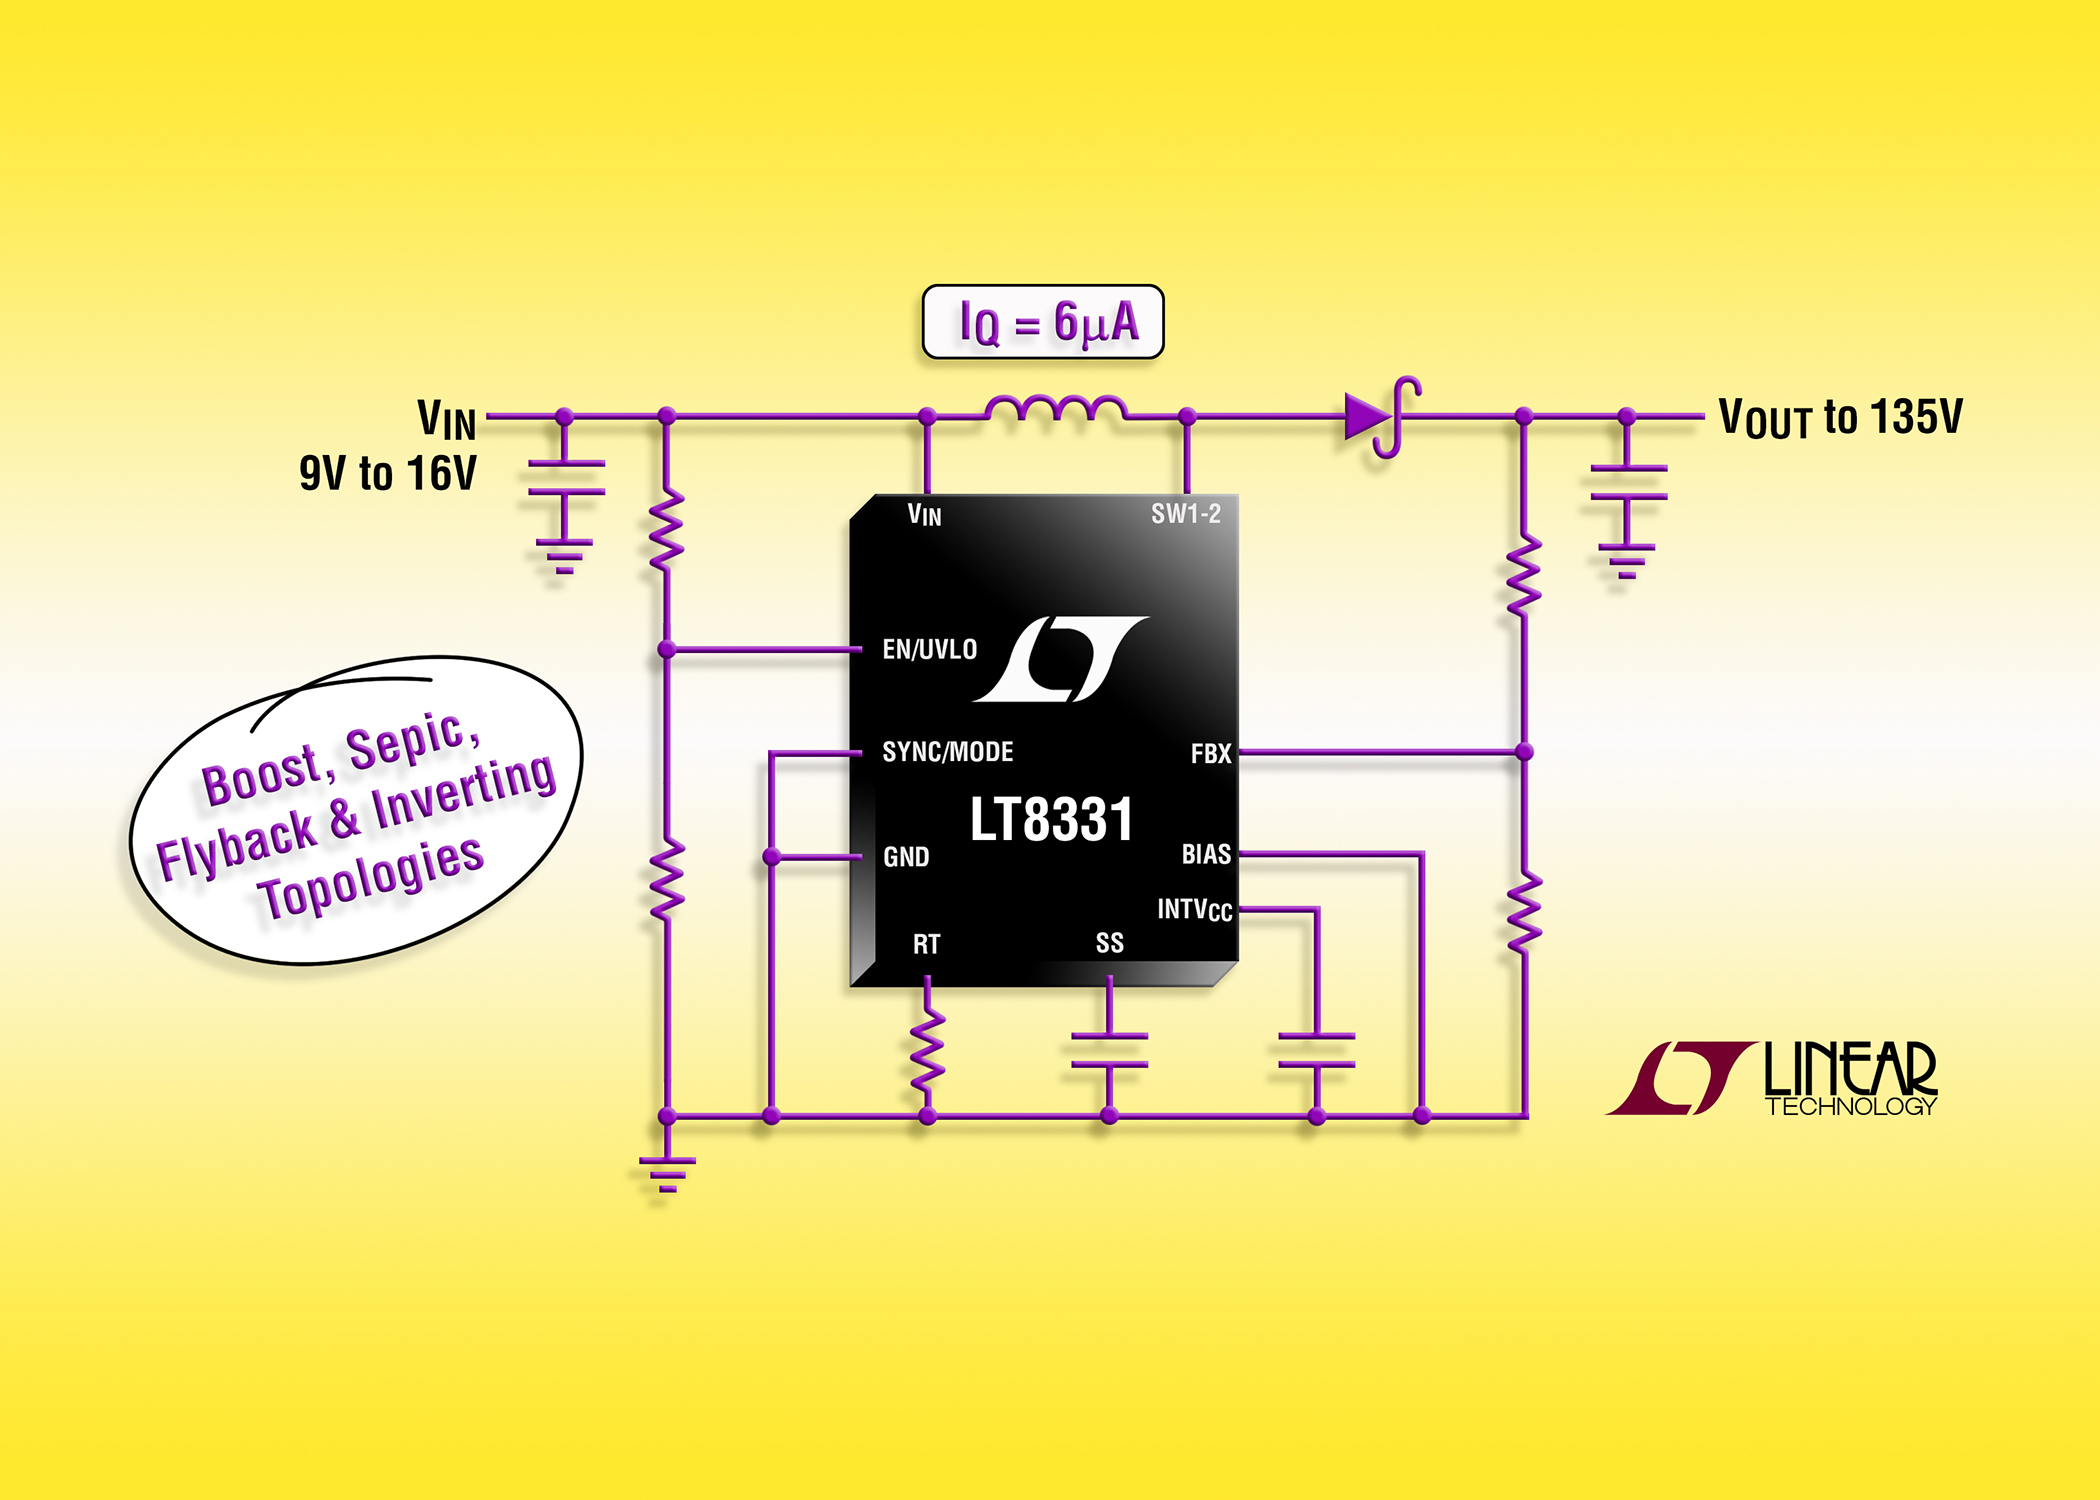 500mA, 140V Boost/SEPIC/Flyback/Inverting  DC/DC Converter with IQ= 6uA